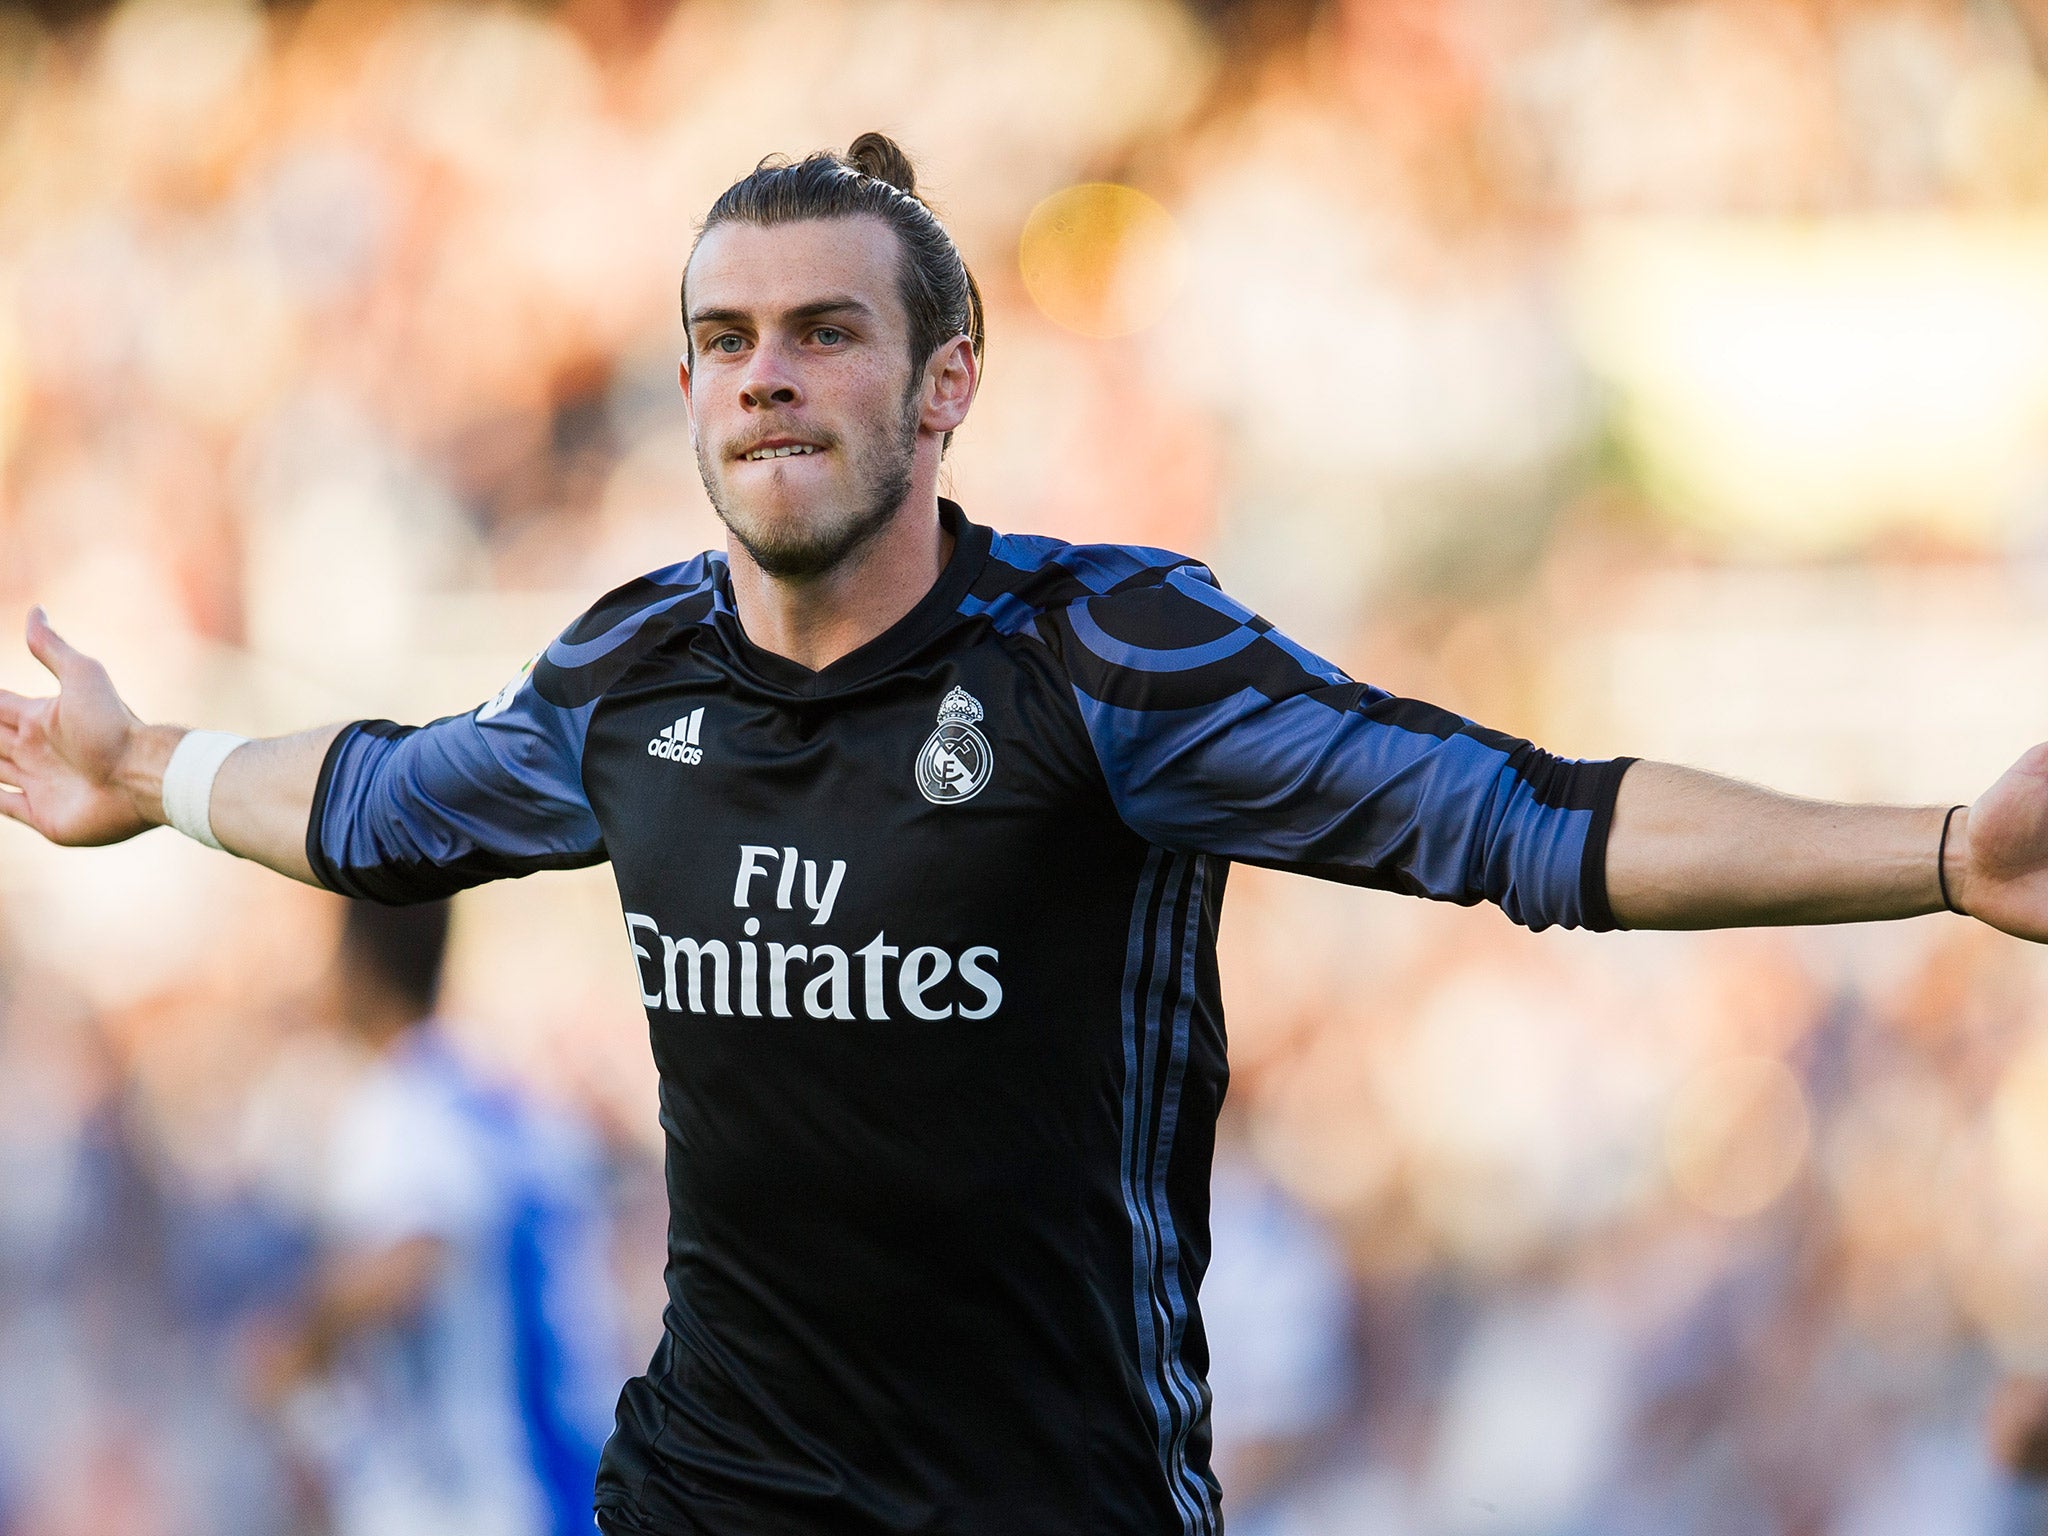 Gareth Bale's new contract could see a release clause of €500m inserted